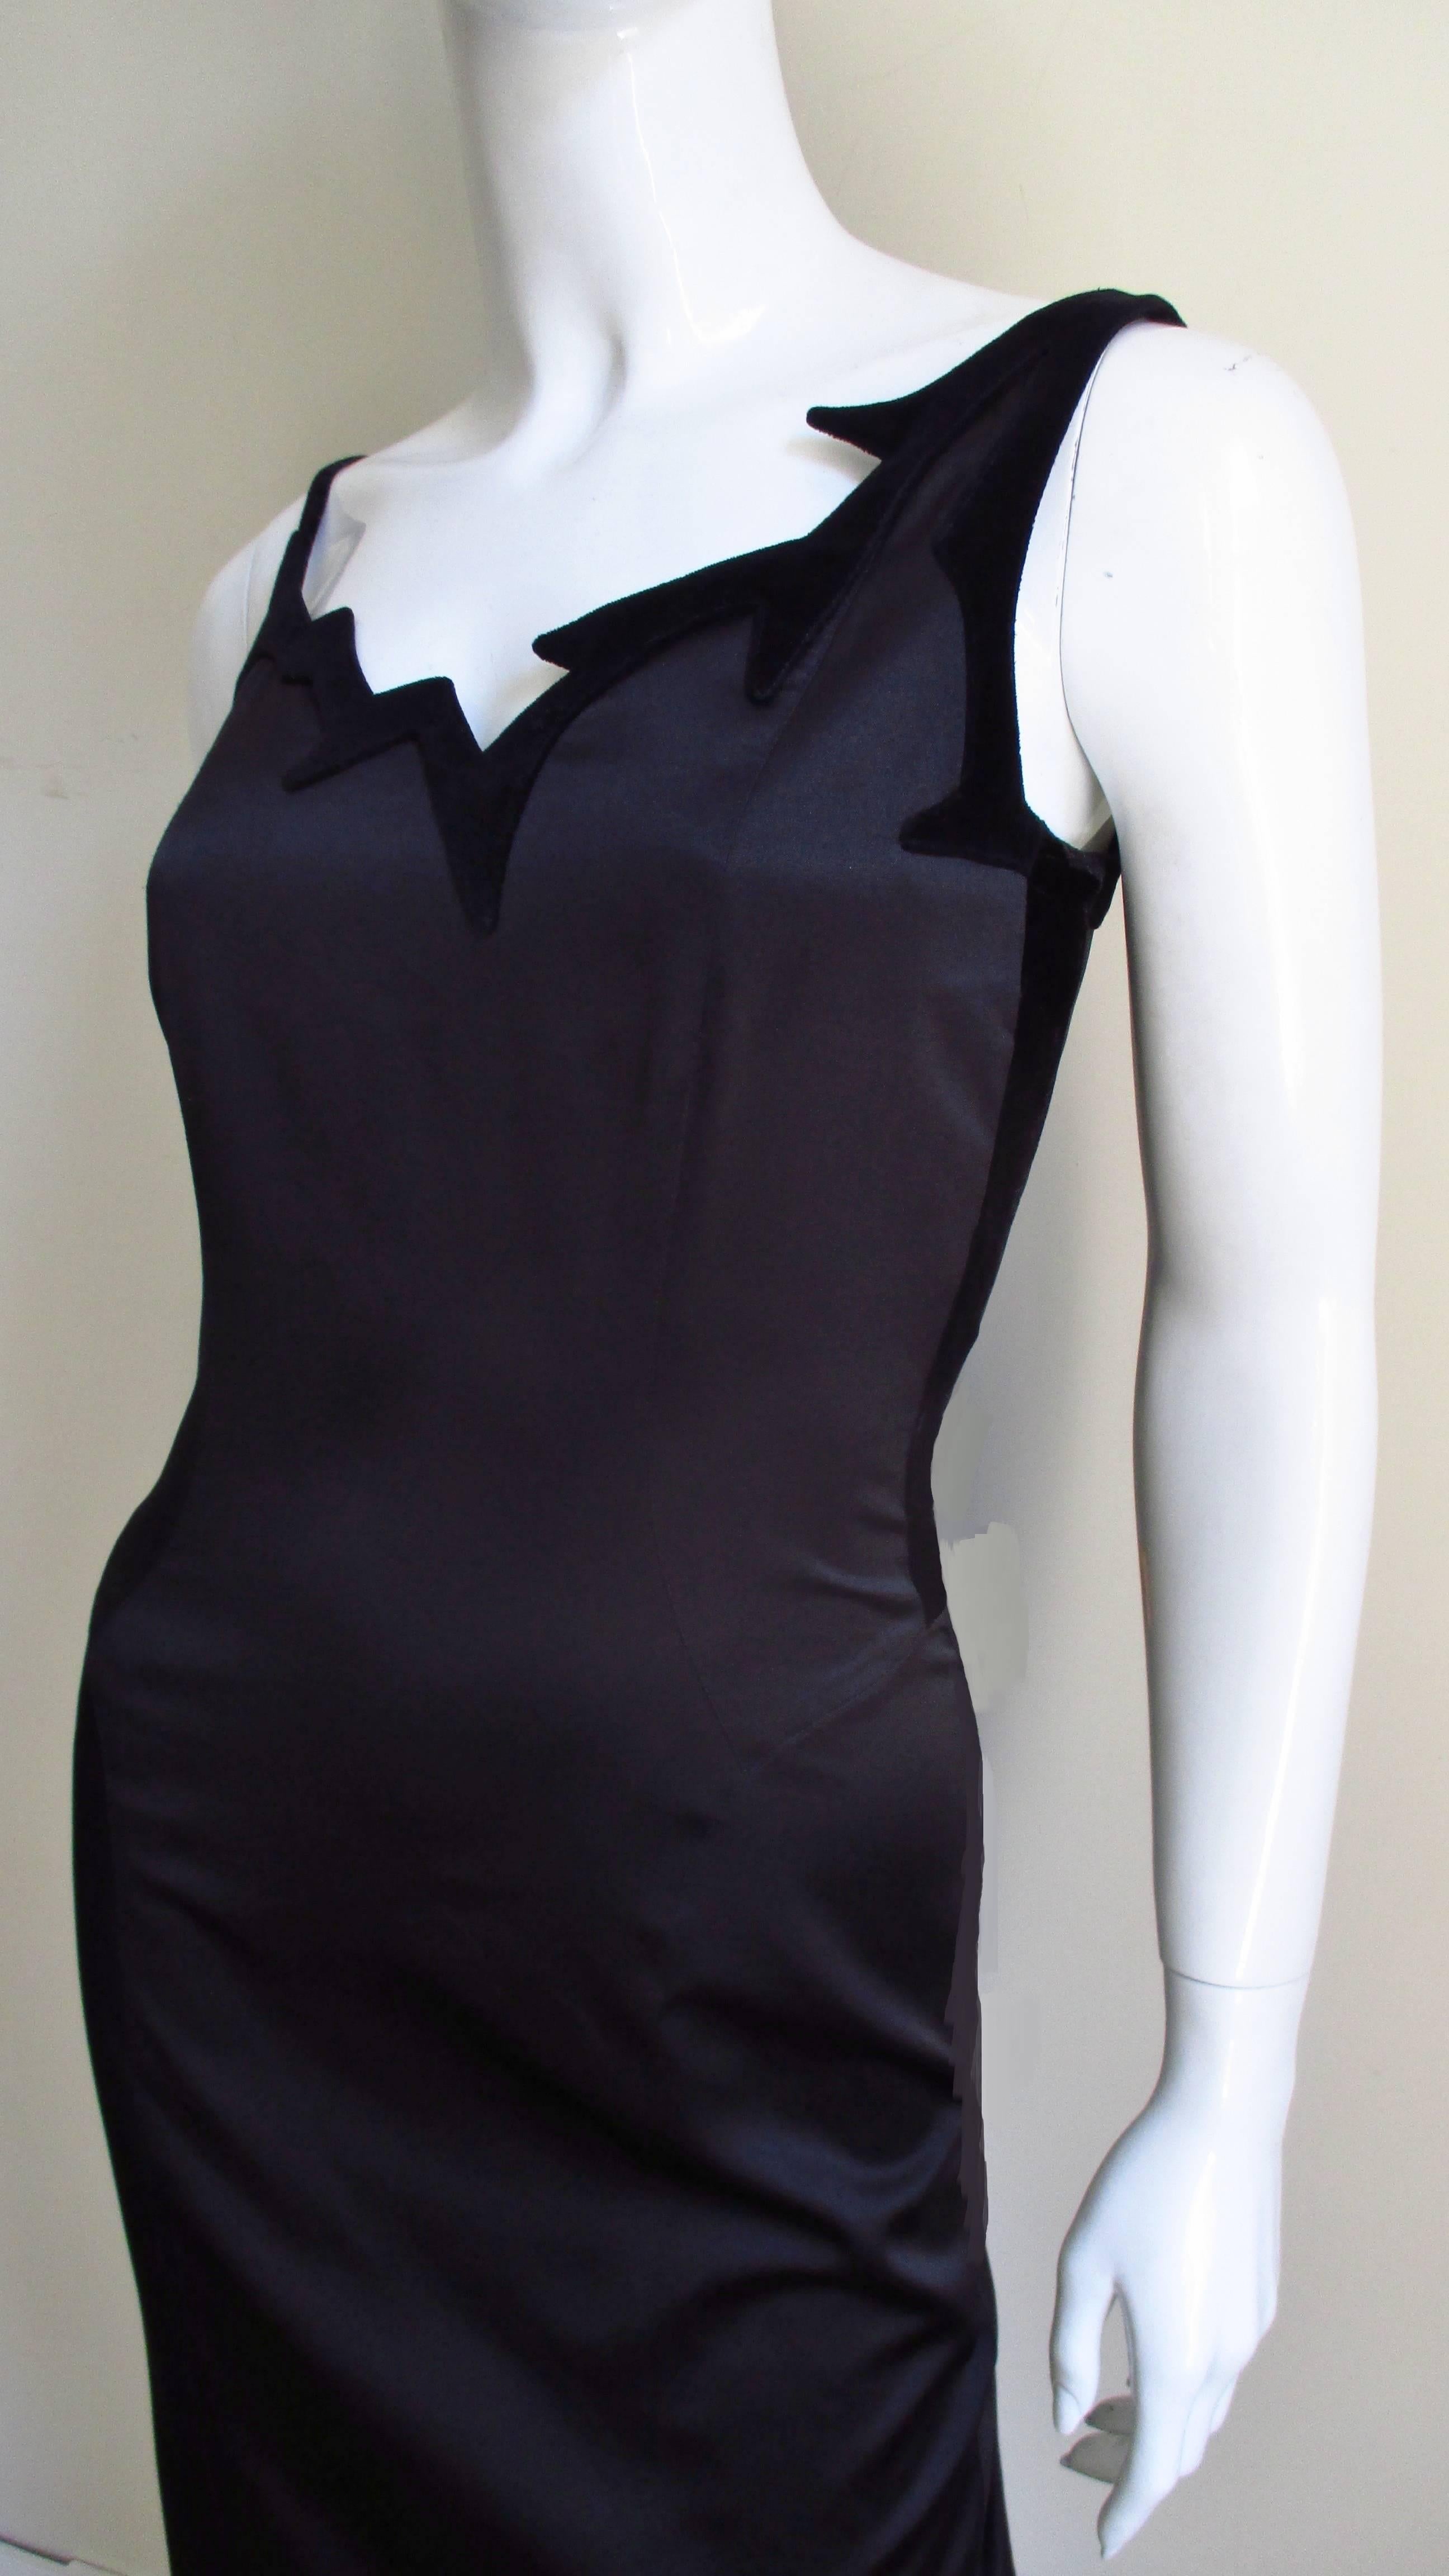 A fabulous black silk dress by Thierry Mugler. It is a semi fitted dress with an asymmetric jagged edge neckline outlined in black velvet and a straight skirt. It is fully lined in silk and has a center back invisible zipper.
Fits sizes Small,